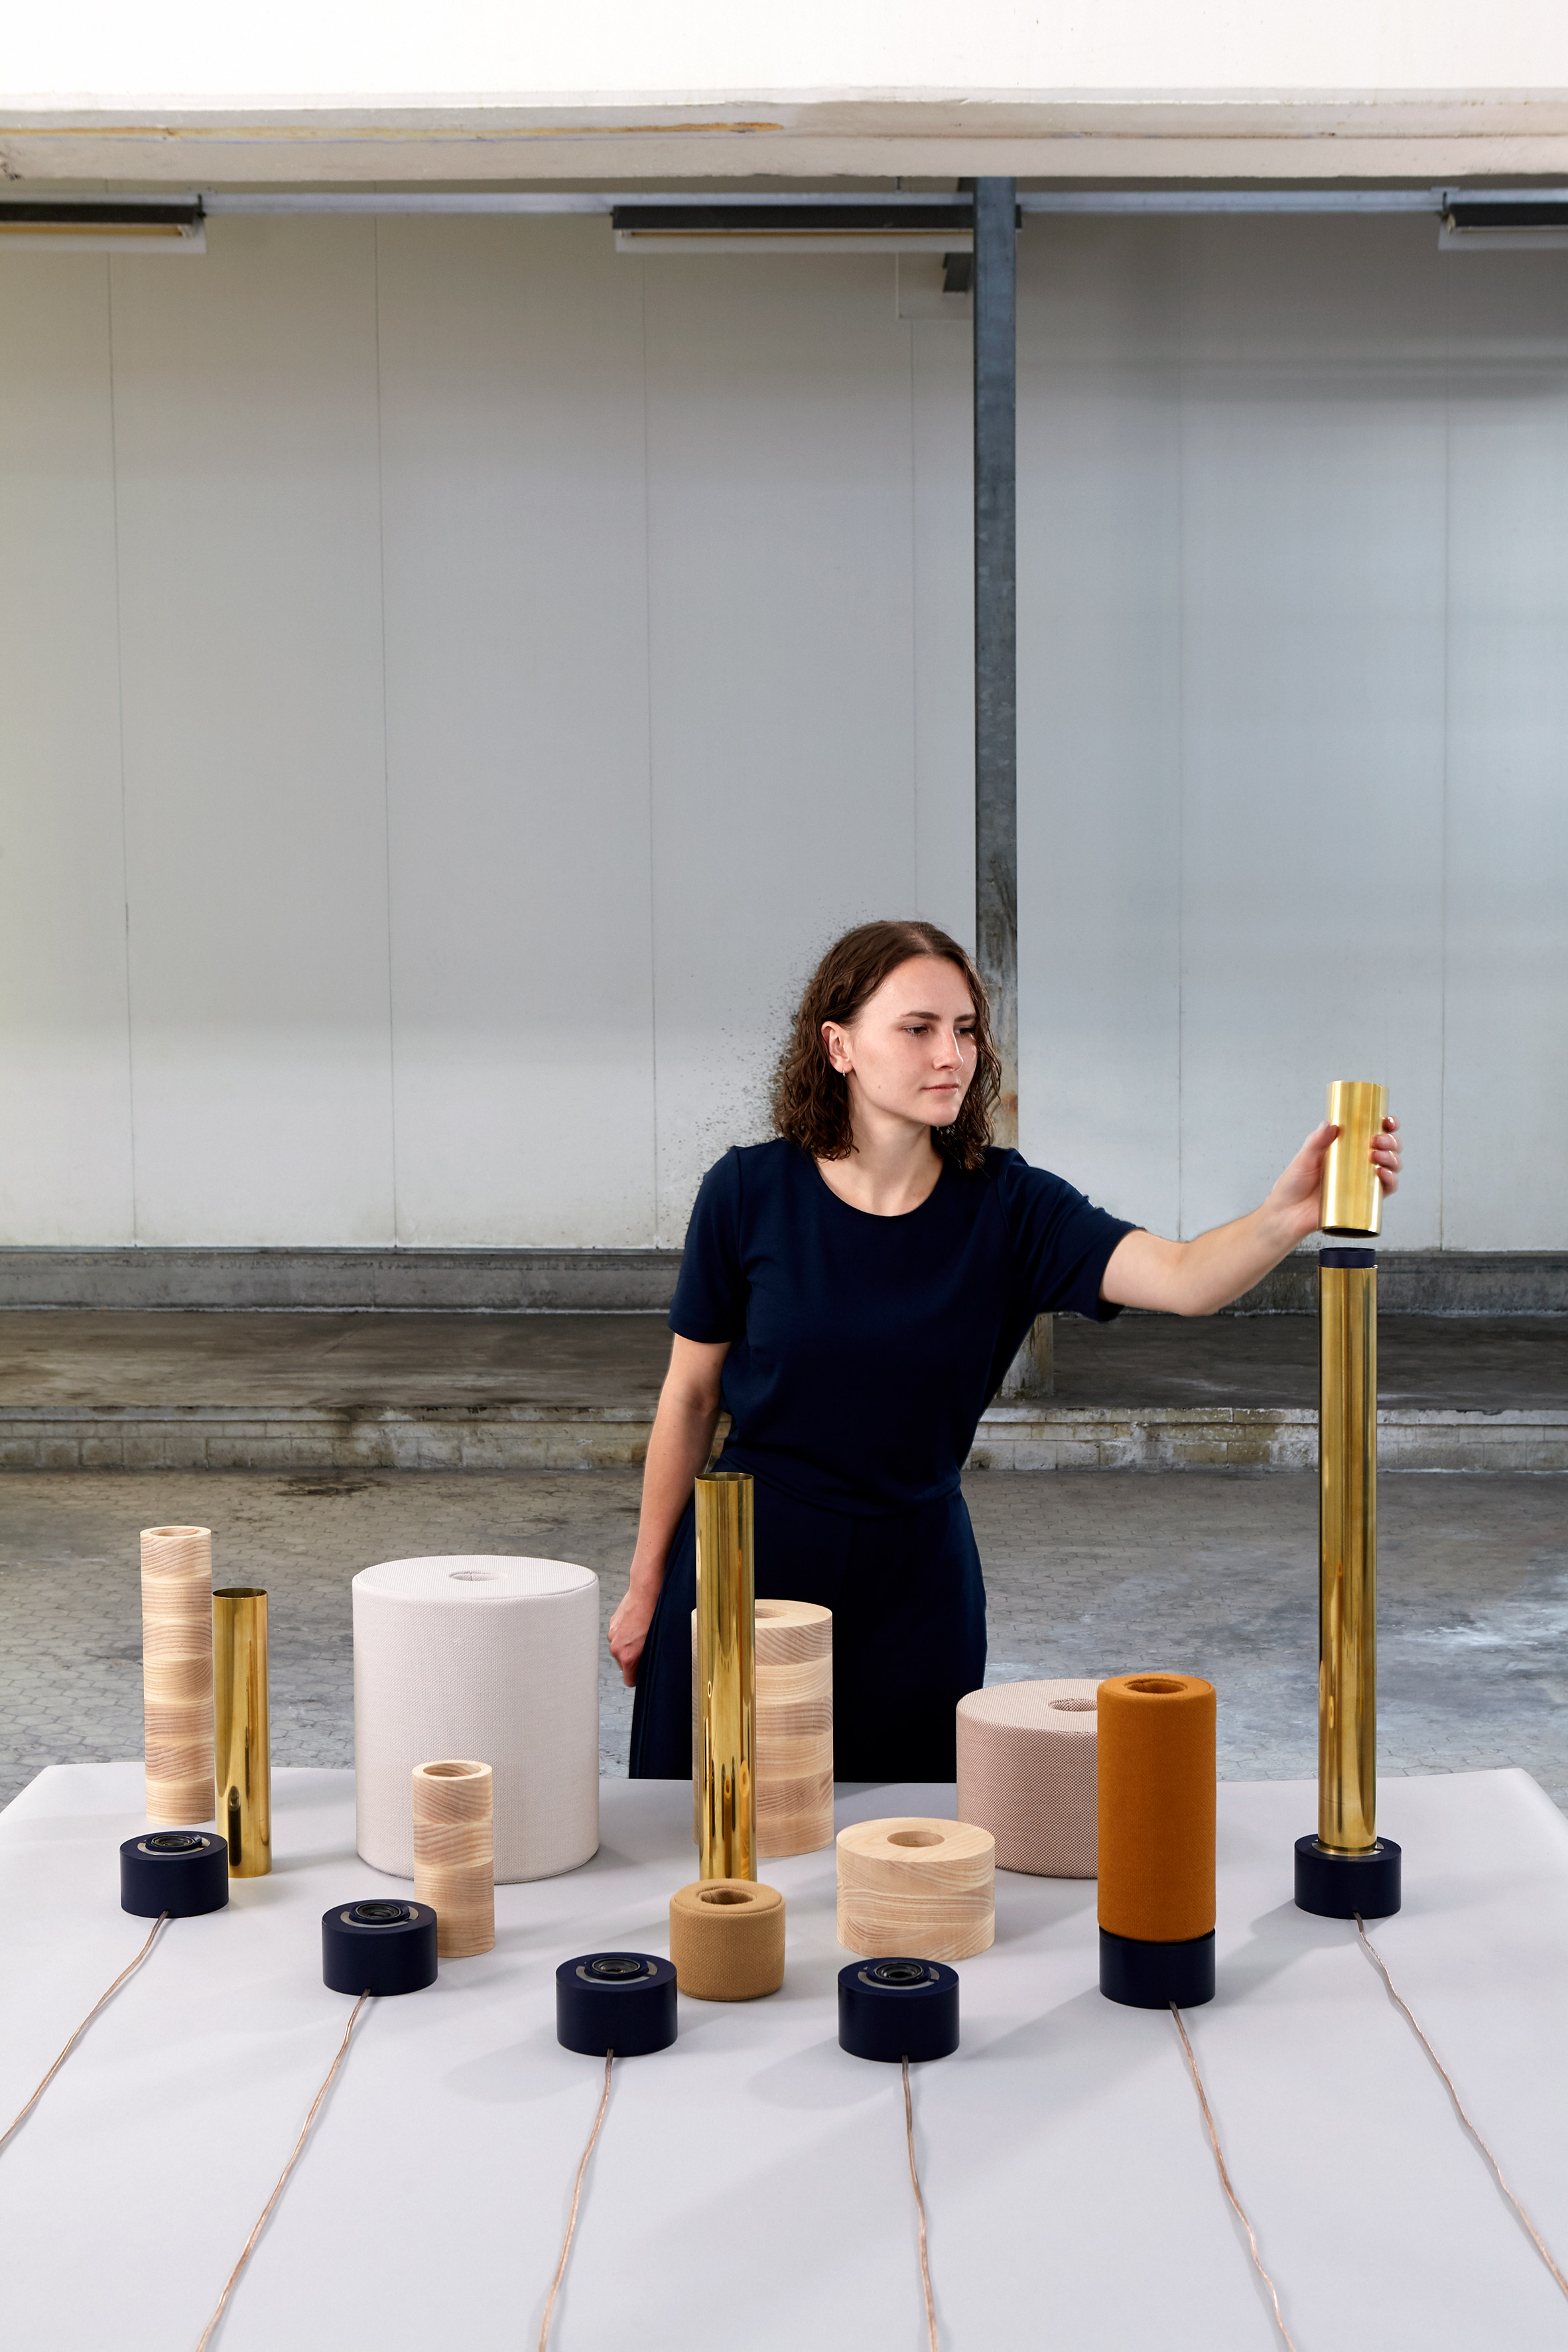 Tessa Spierings' Echo tactile sound system explores the acoustic properties of materials